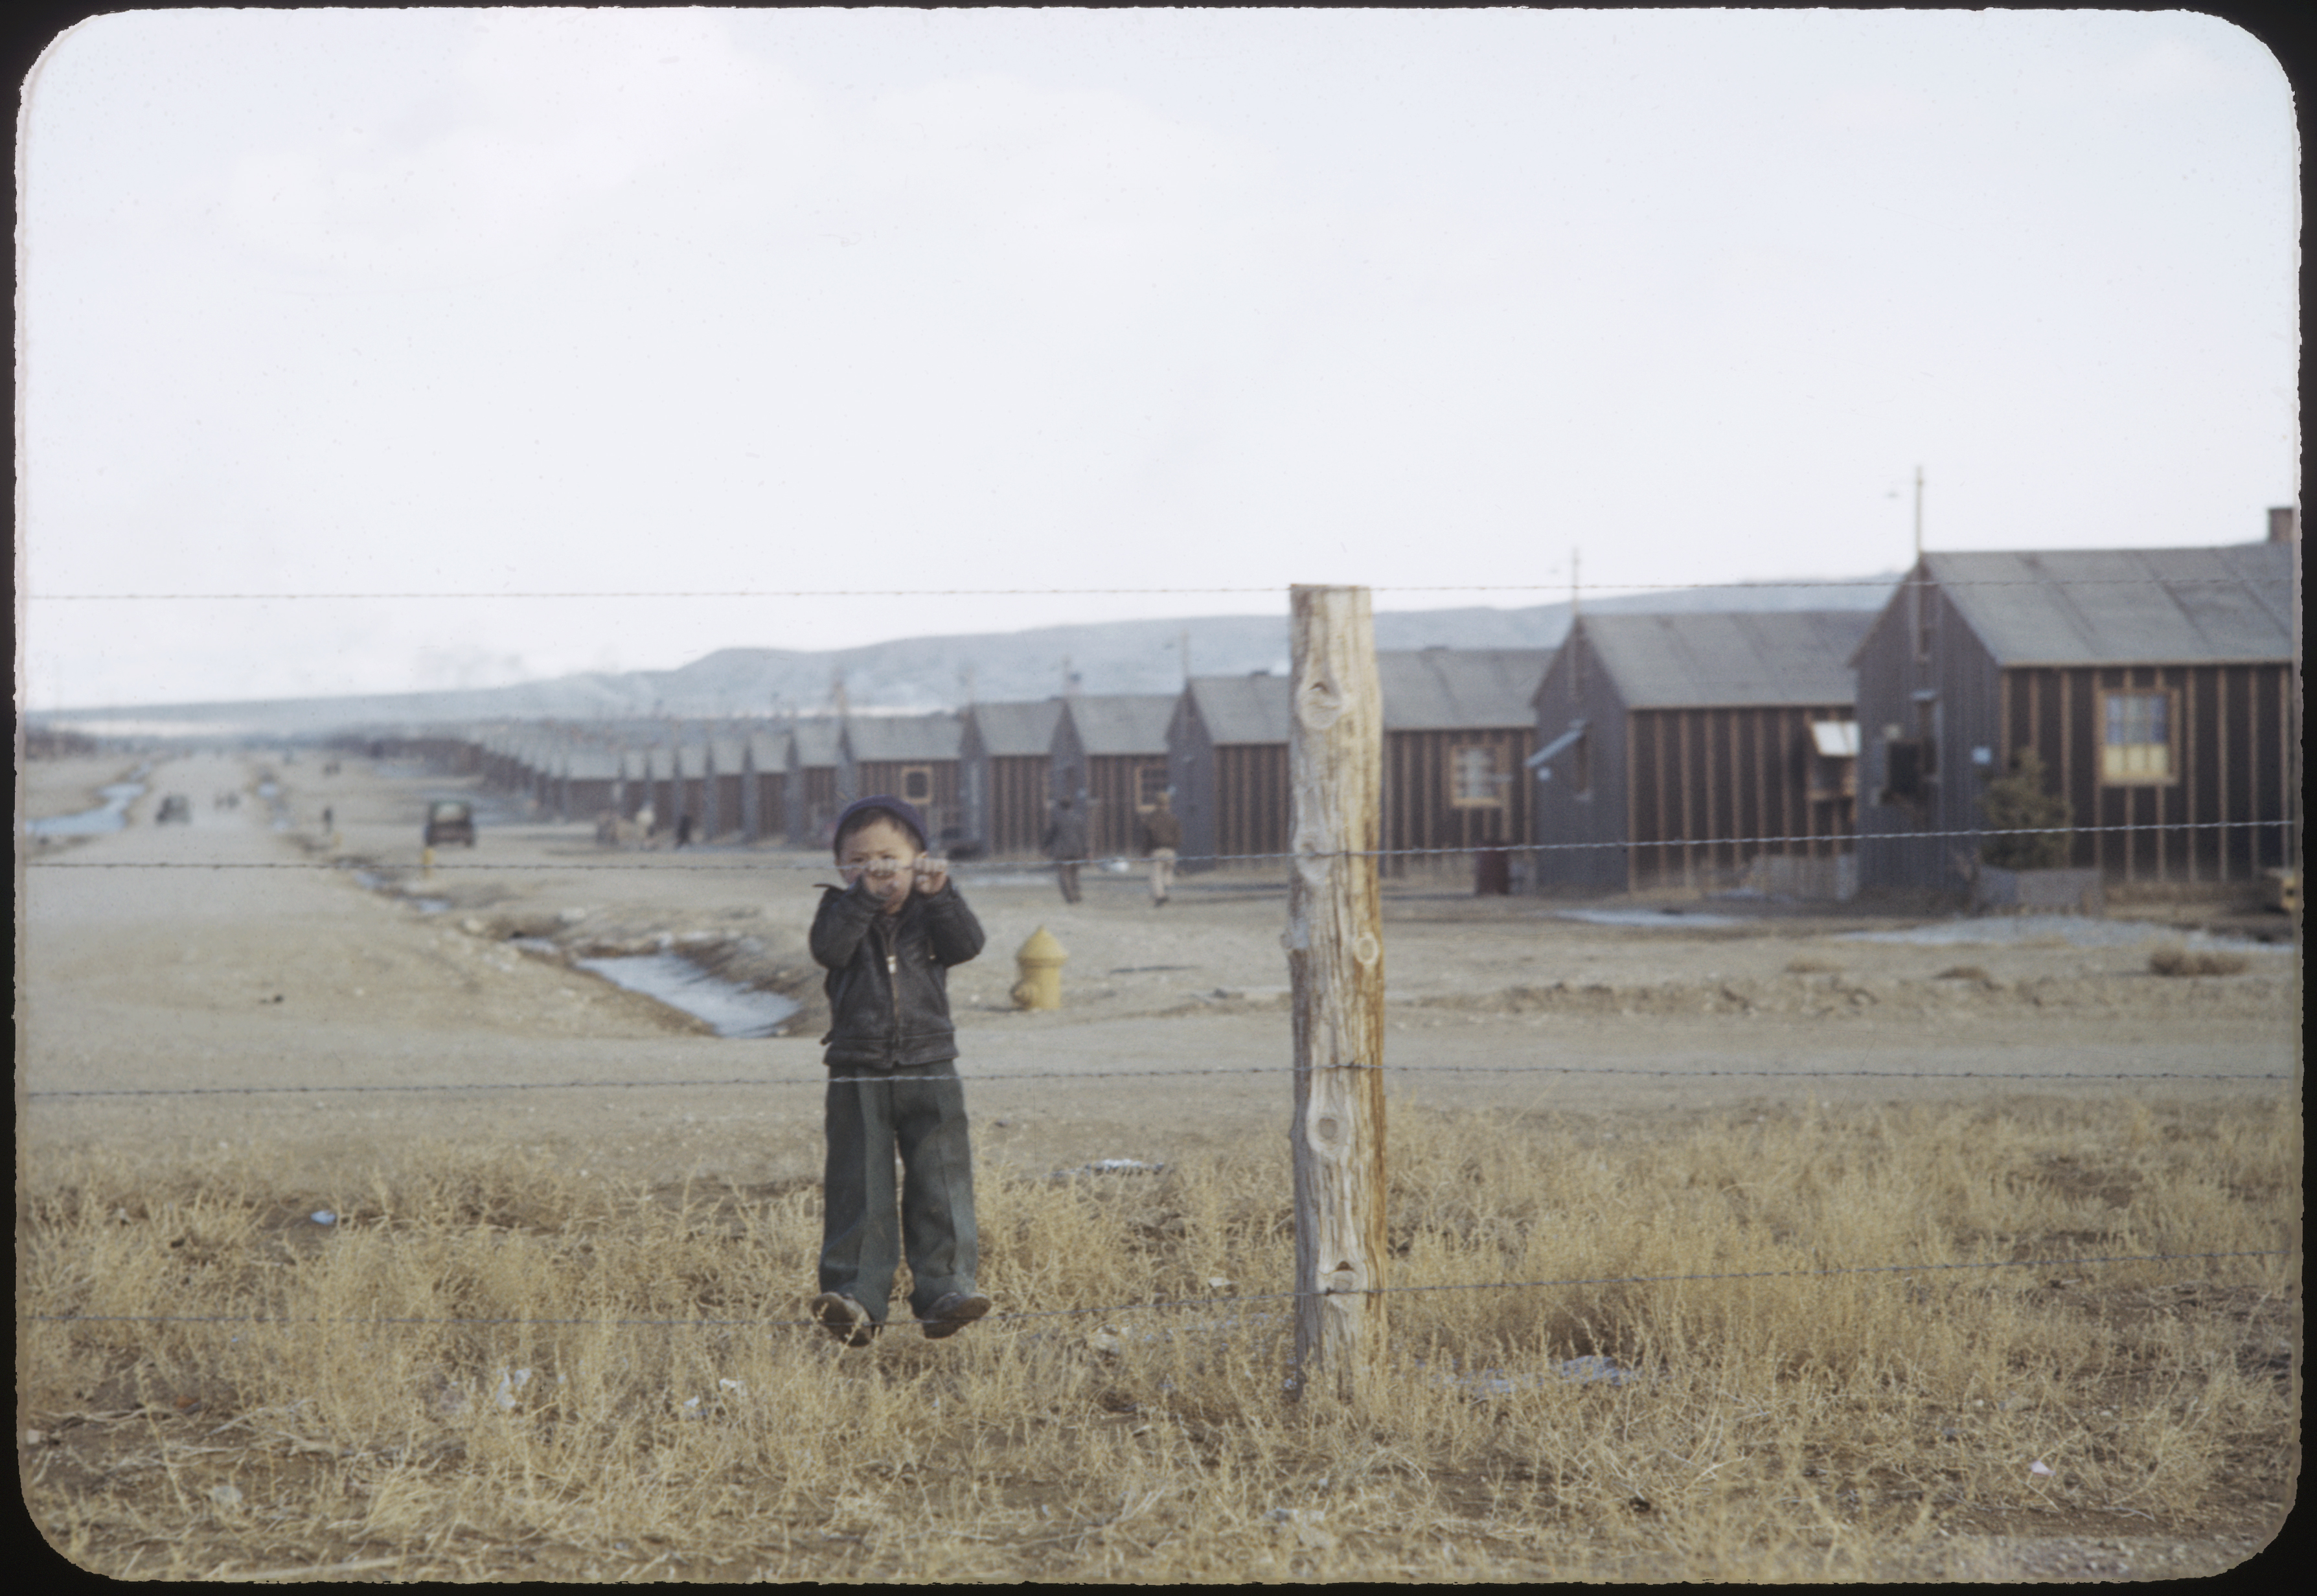 A boy clings to a barbed wire fence looking out from a Japanese American incarceration site